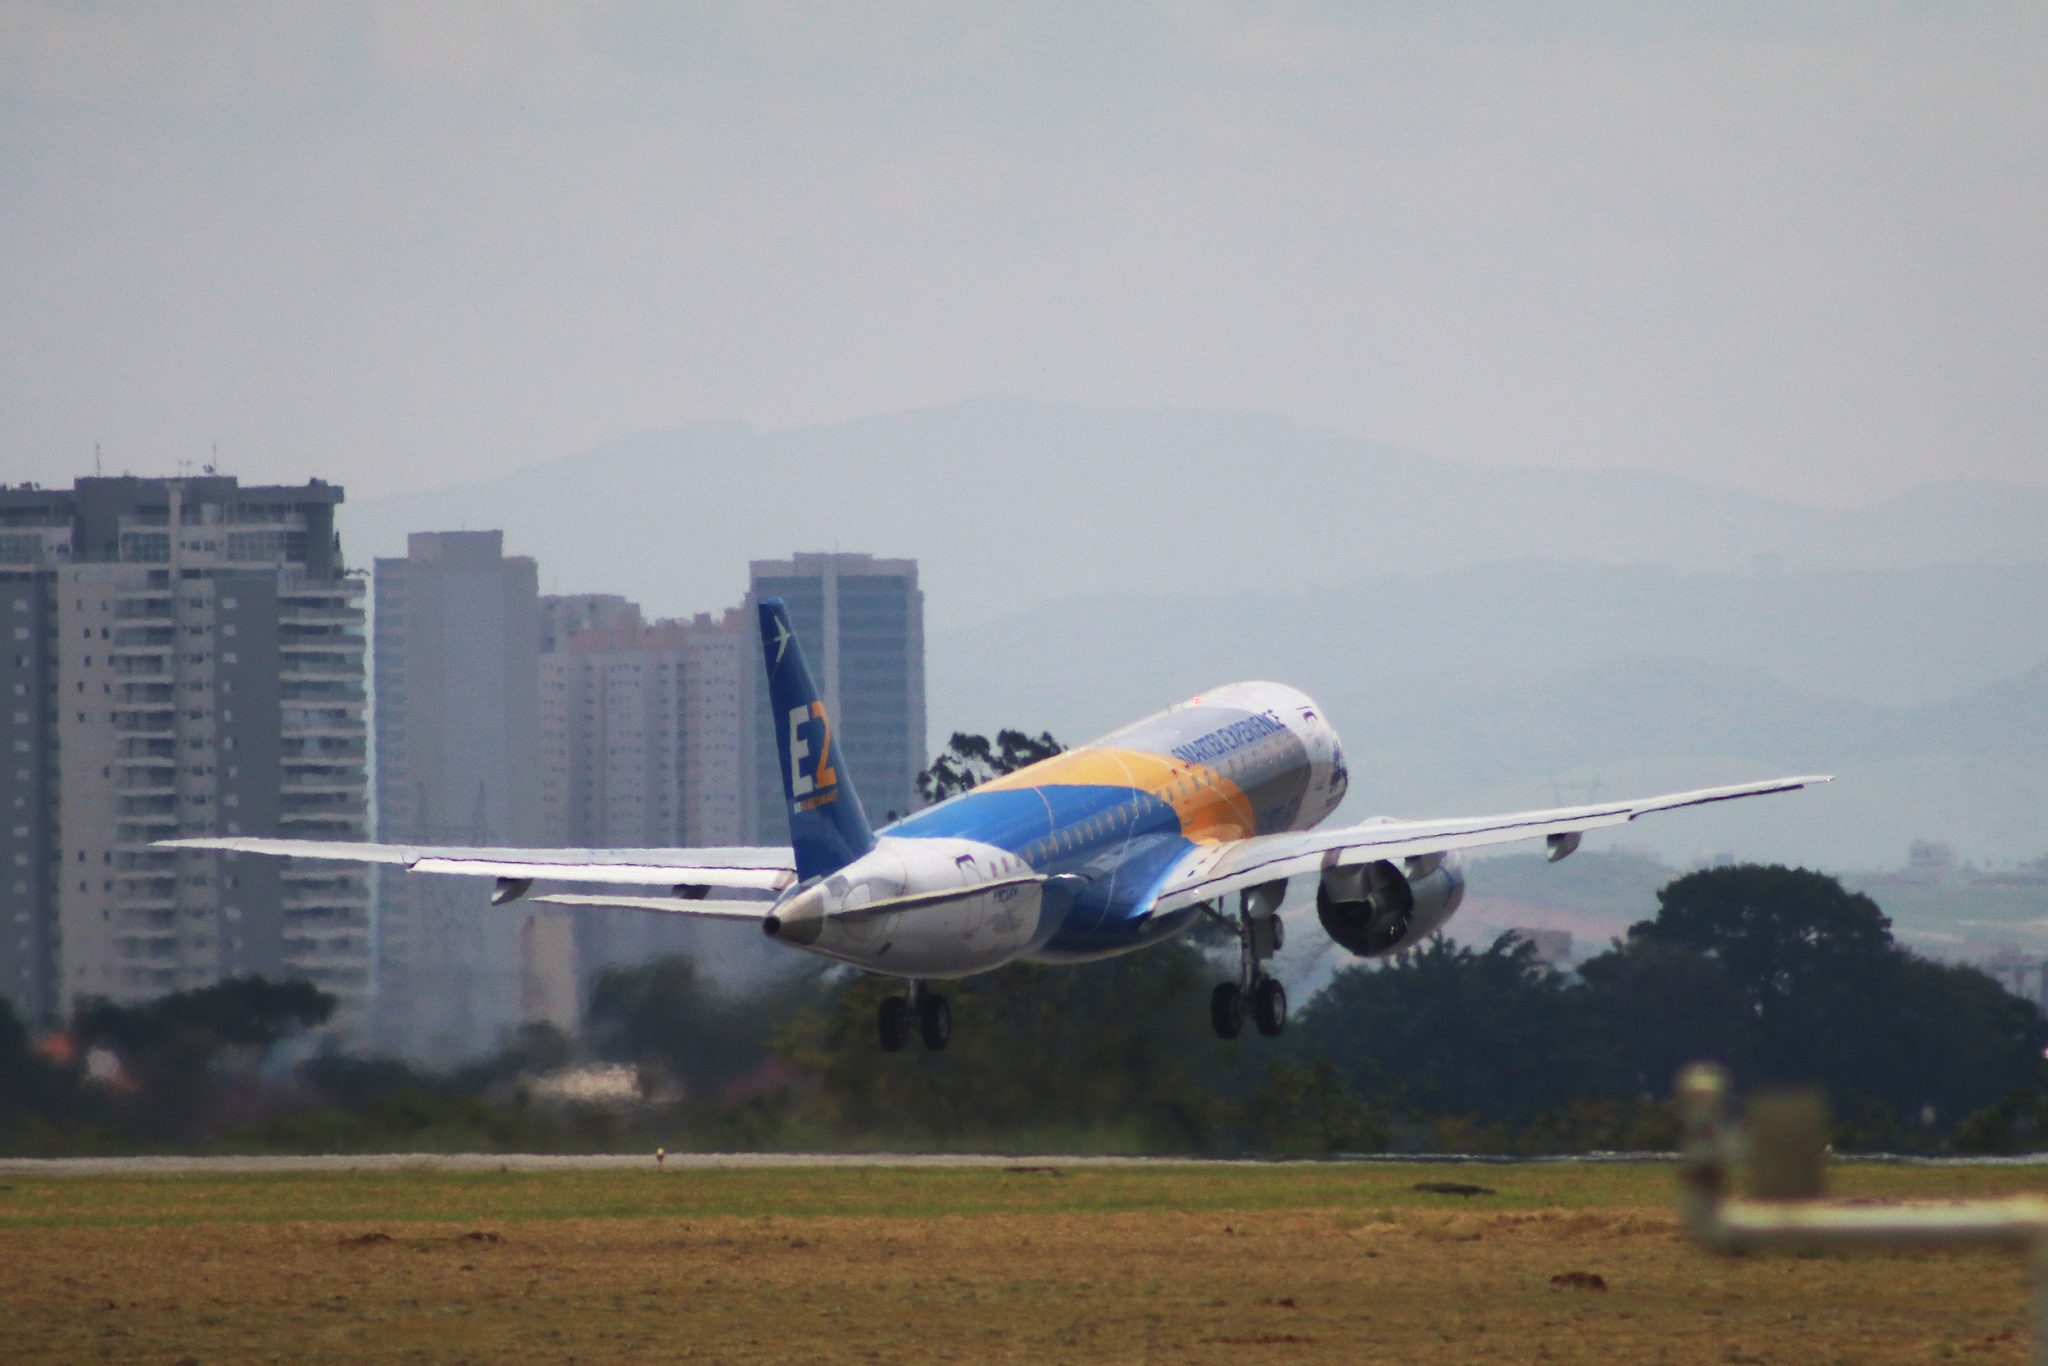 Madagascar Airlines leases three Embraer E190-E2 from Azorra